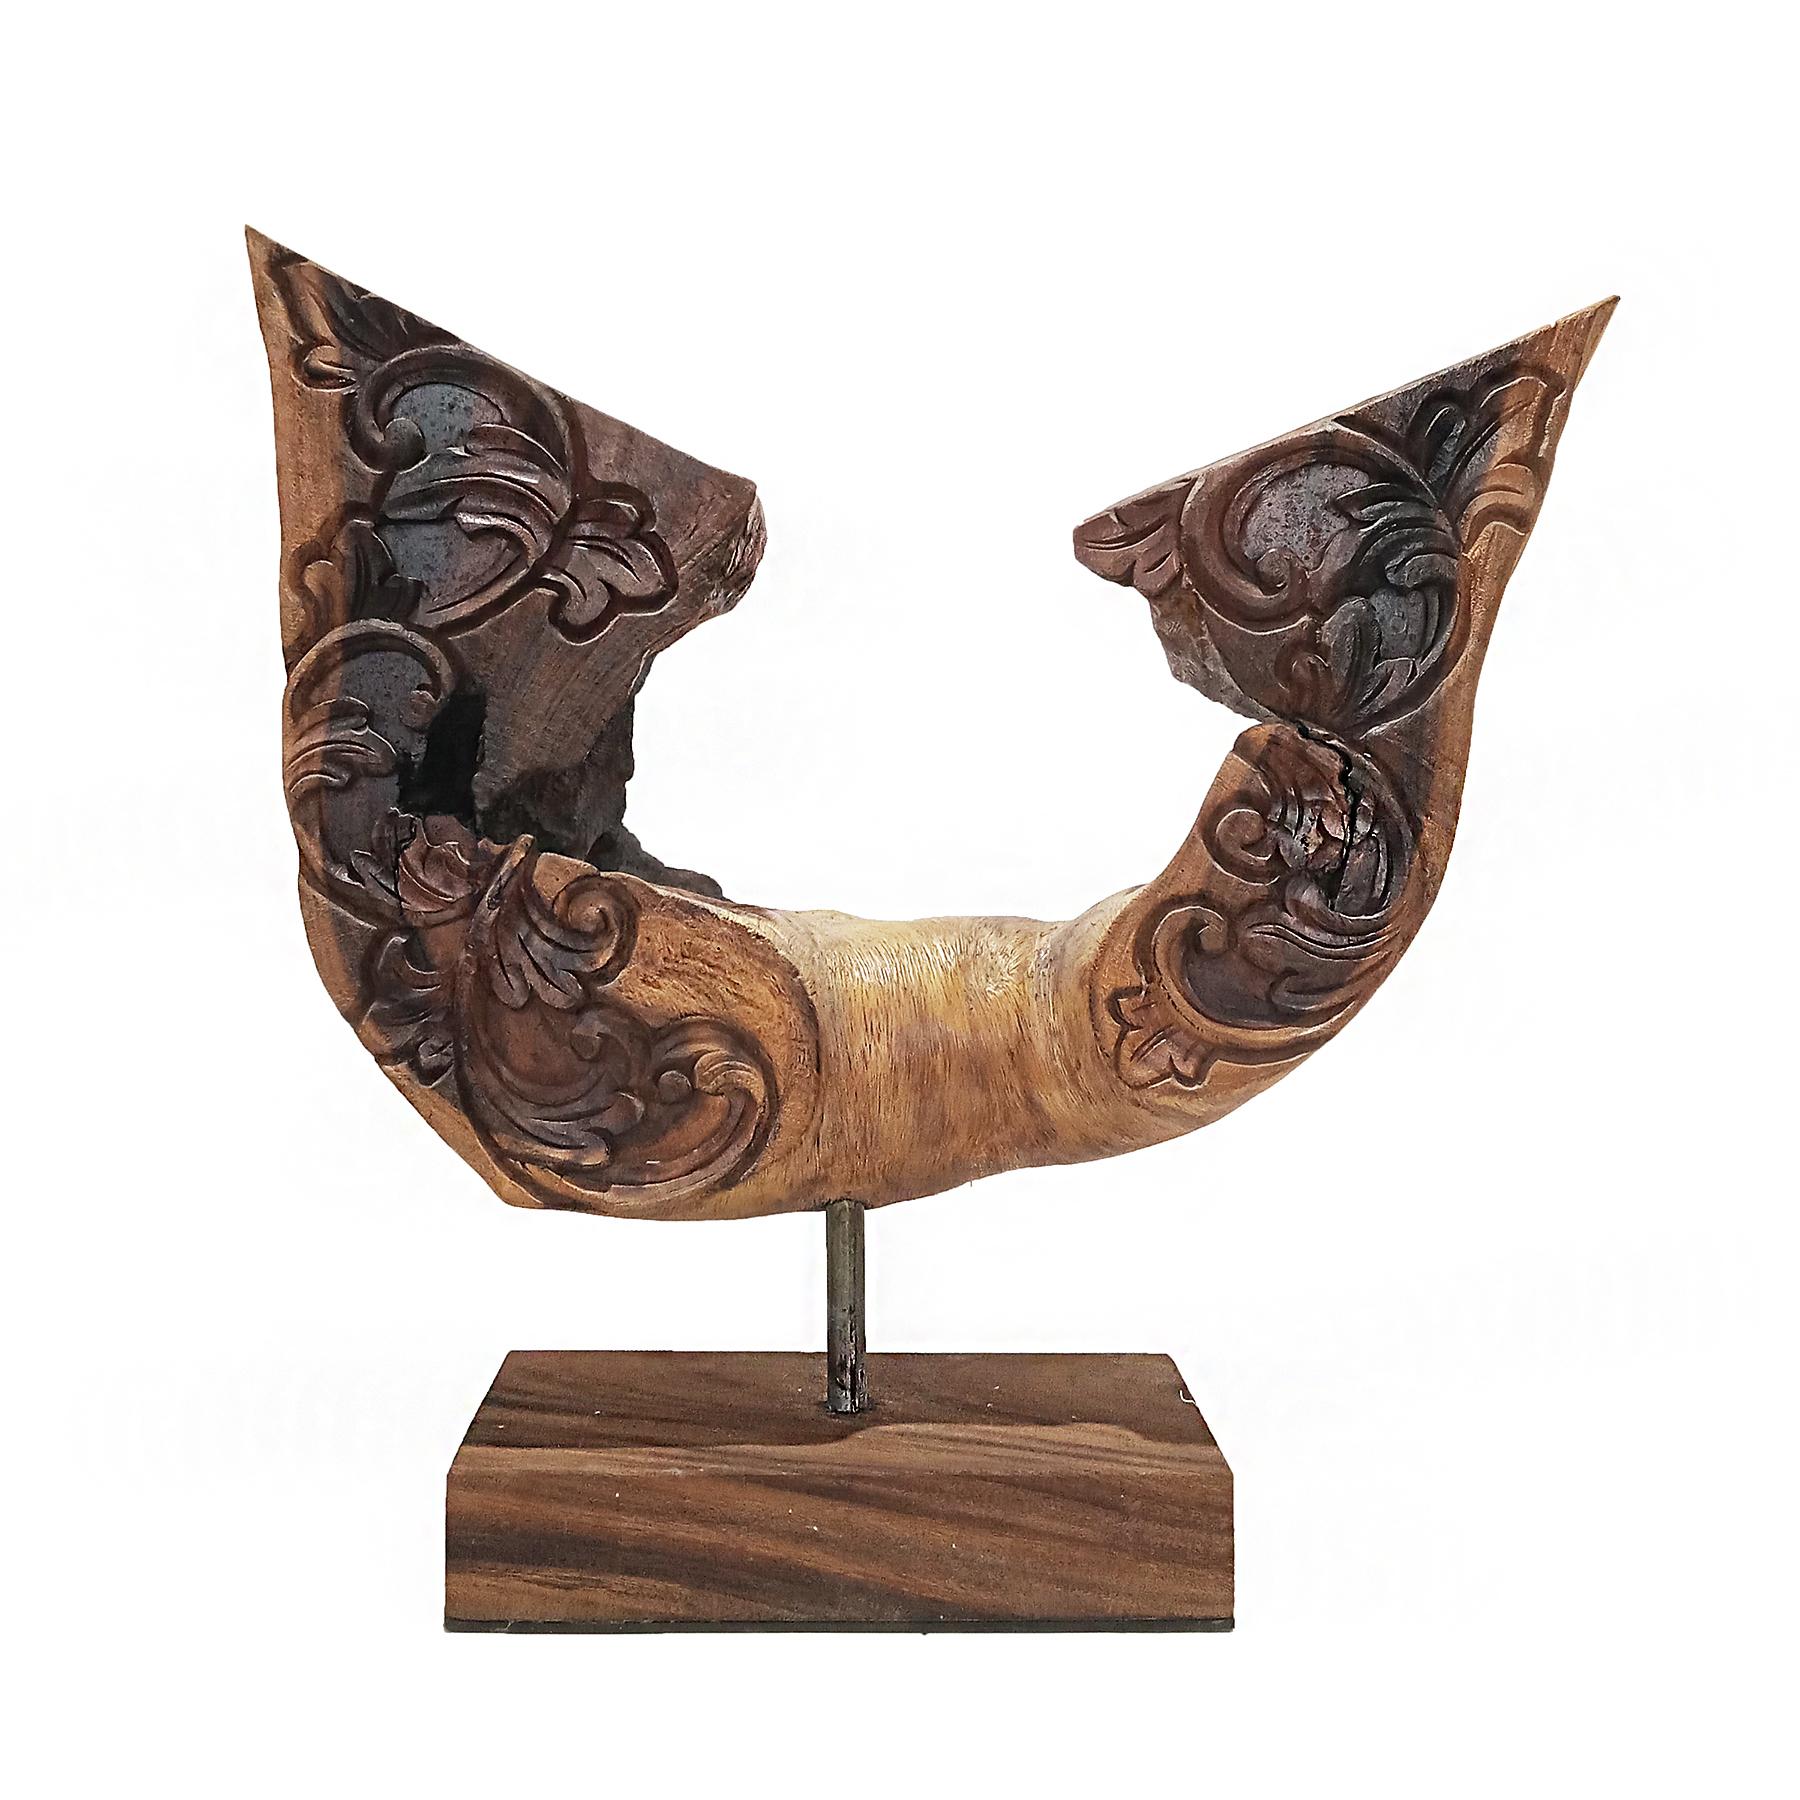 A reclaimed wood sculpture shaped as a pair of wings, hand-carved in Indonesia, late 20th Century. The material is Suar wood (Samanea Saman or Monkeywood), known for its beautiful veining, texture and color. 

Mounted on a reclaimed wood stand.